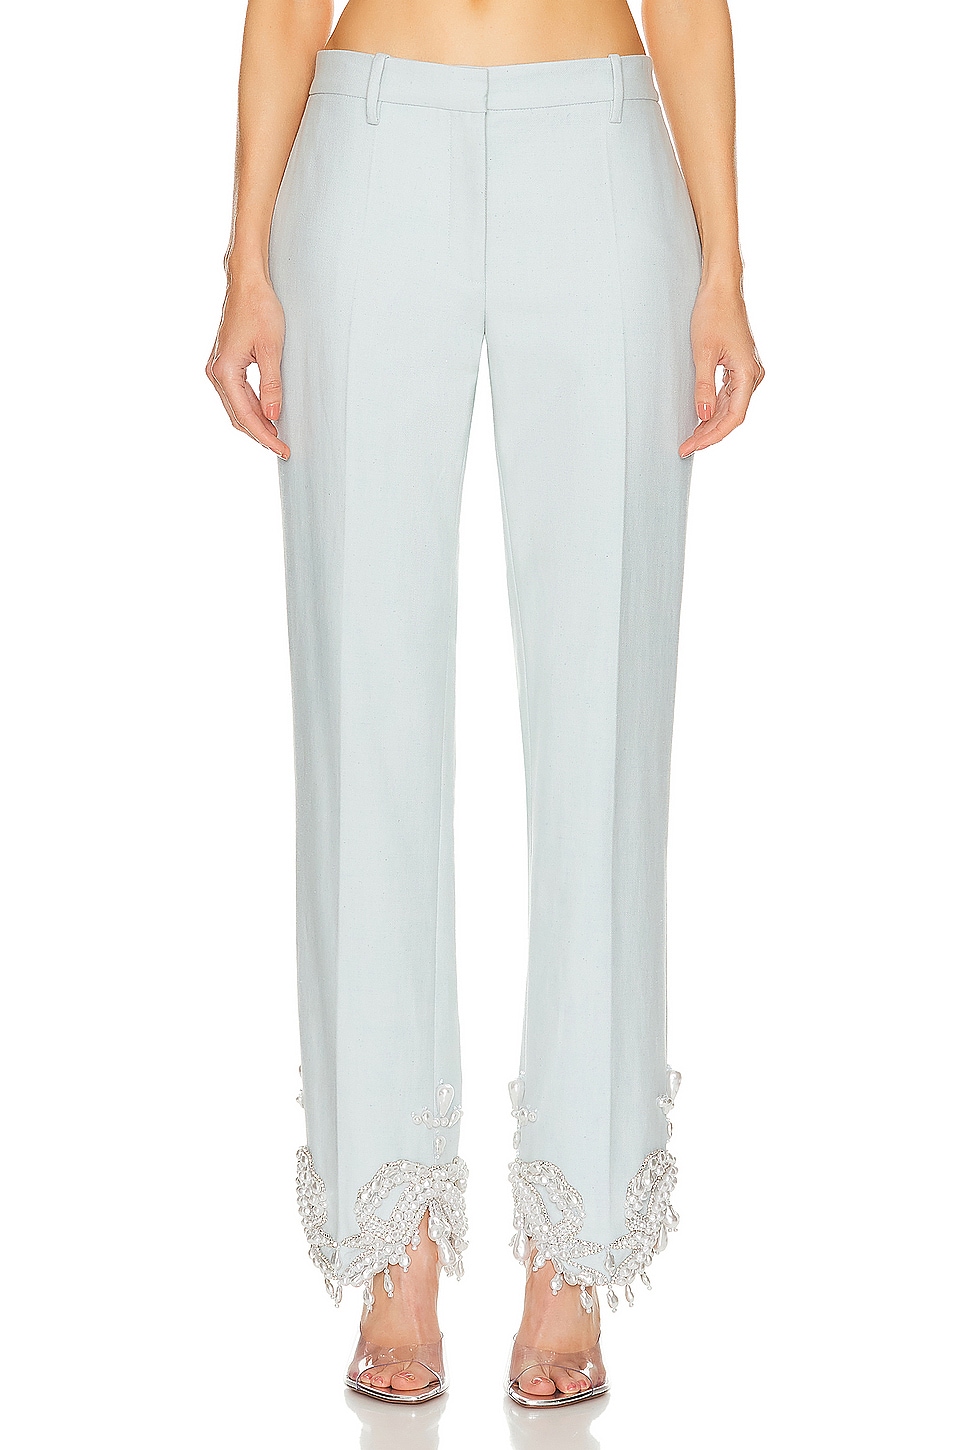 Image 1 of Wiederhoeft Embroidered Pearl & Crystal Trouser in Light Blue